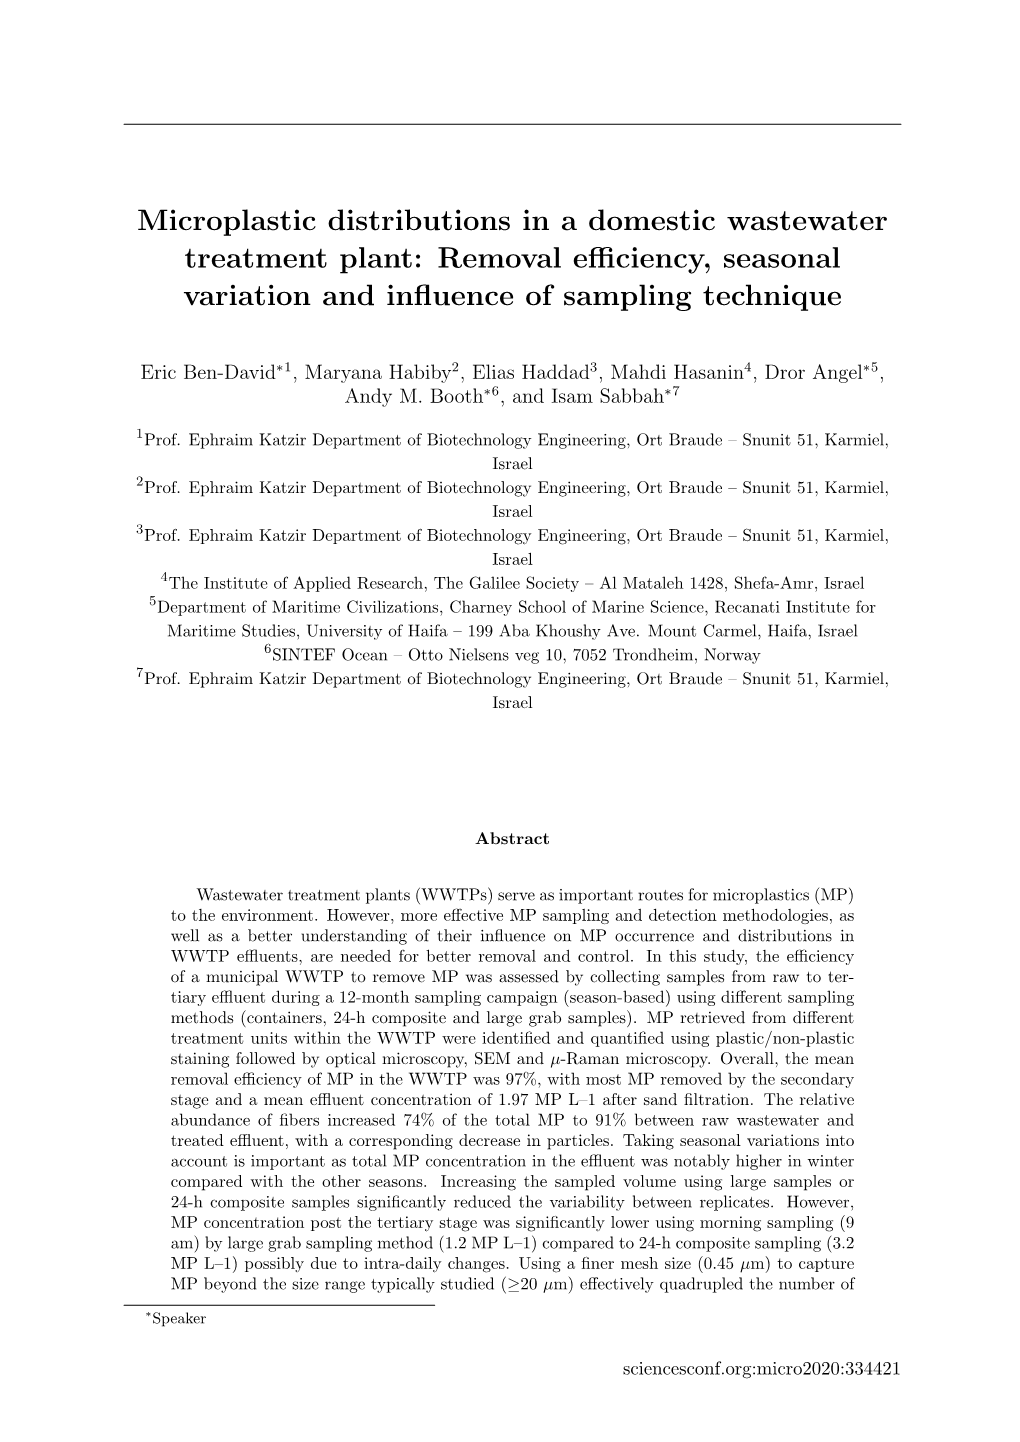 Microplastic Distributions in a Domestic Wastewater Treatment Plant: Removal Eﬃciency, Seasonal Variation and Inﬂuence of Sampling Technique